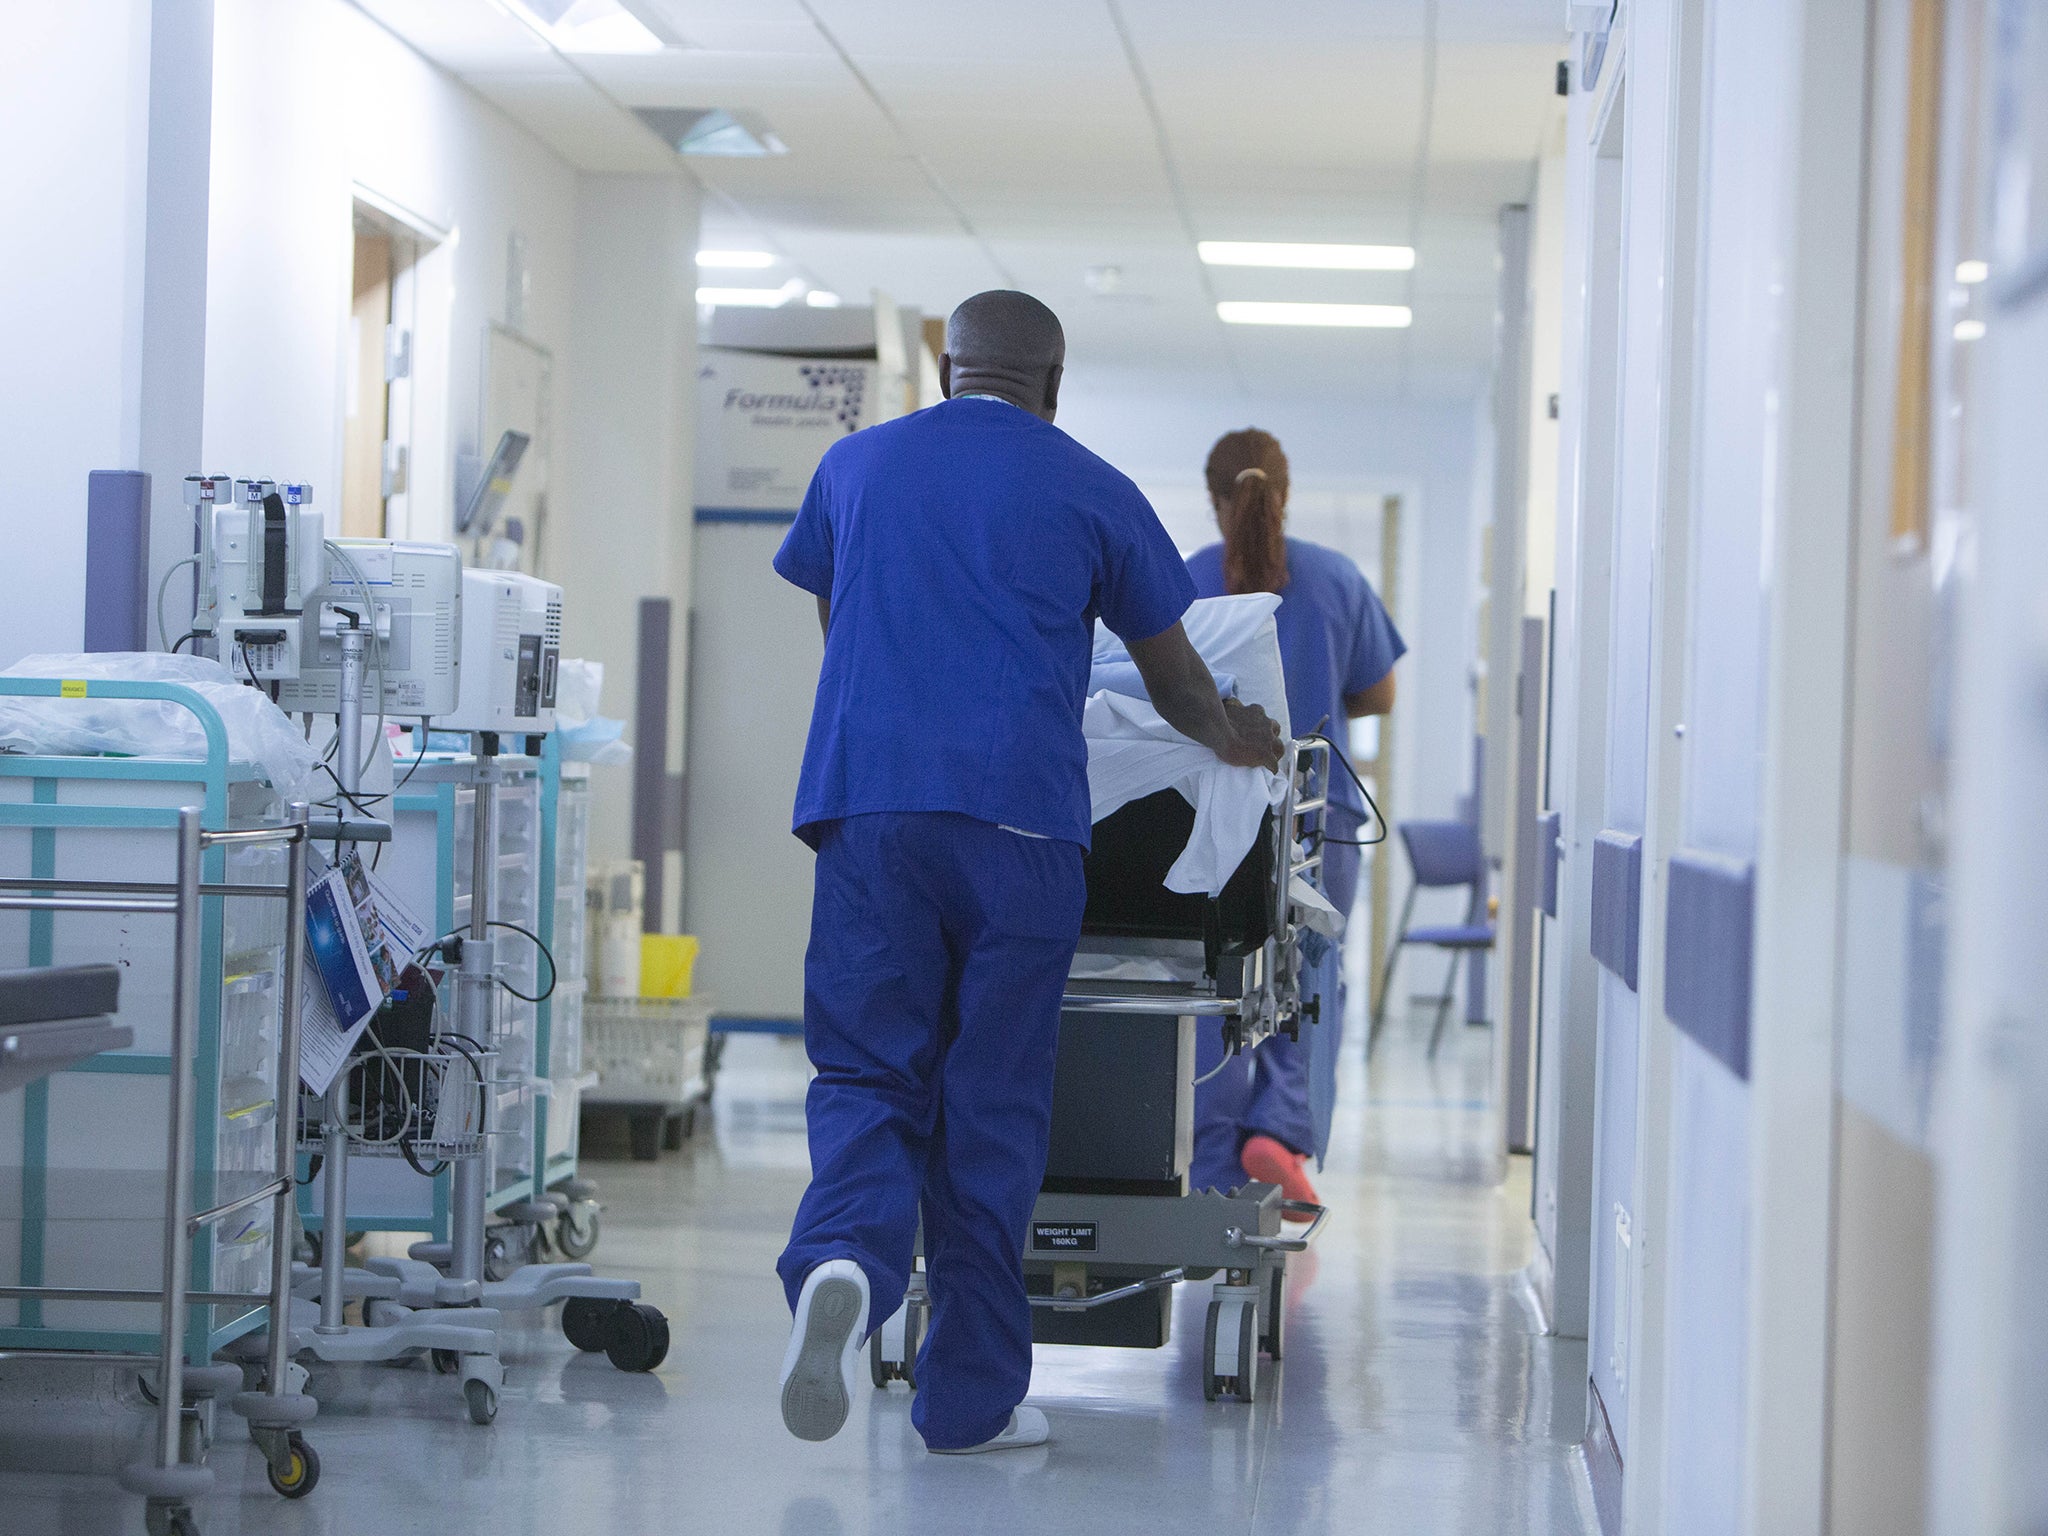 Only 26 per cent of nurses and midwives felt staffing levels were high enough